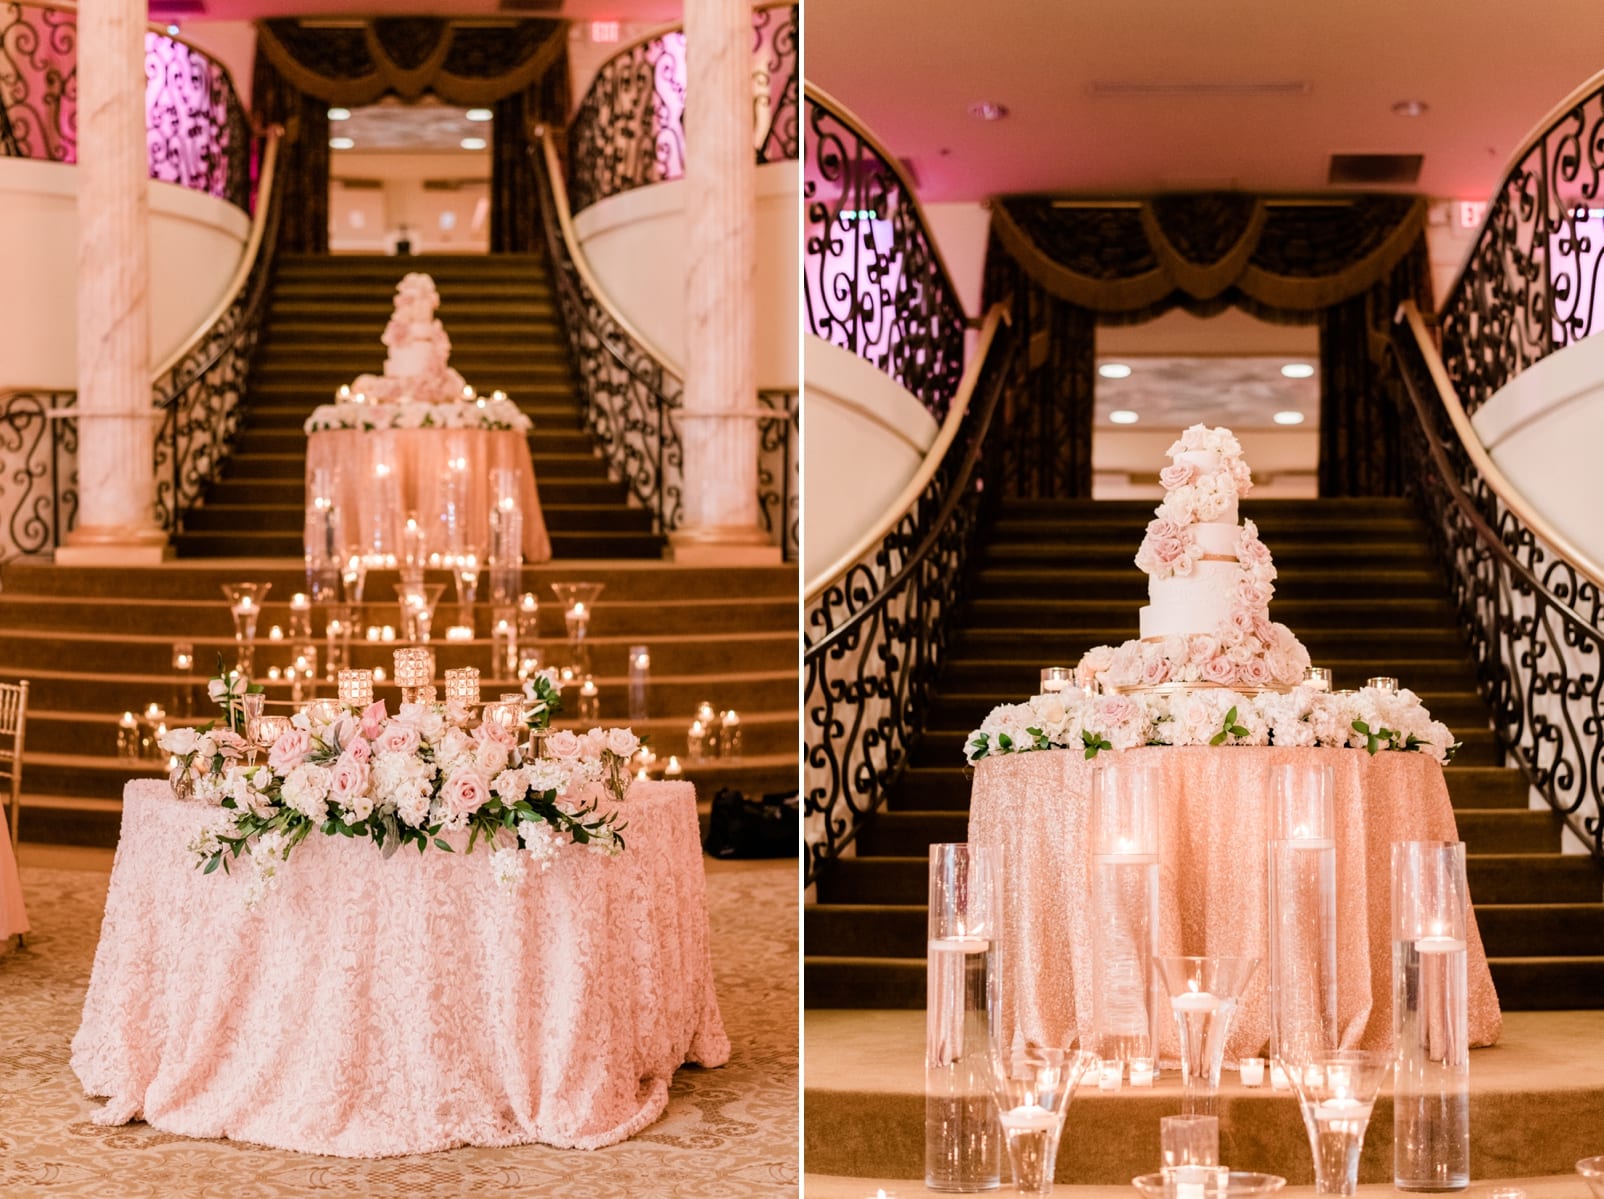 Grand Marquise Ballroom cake display on table with a light pink table cloth at the top of the stairs photo